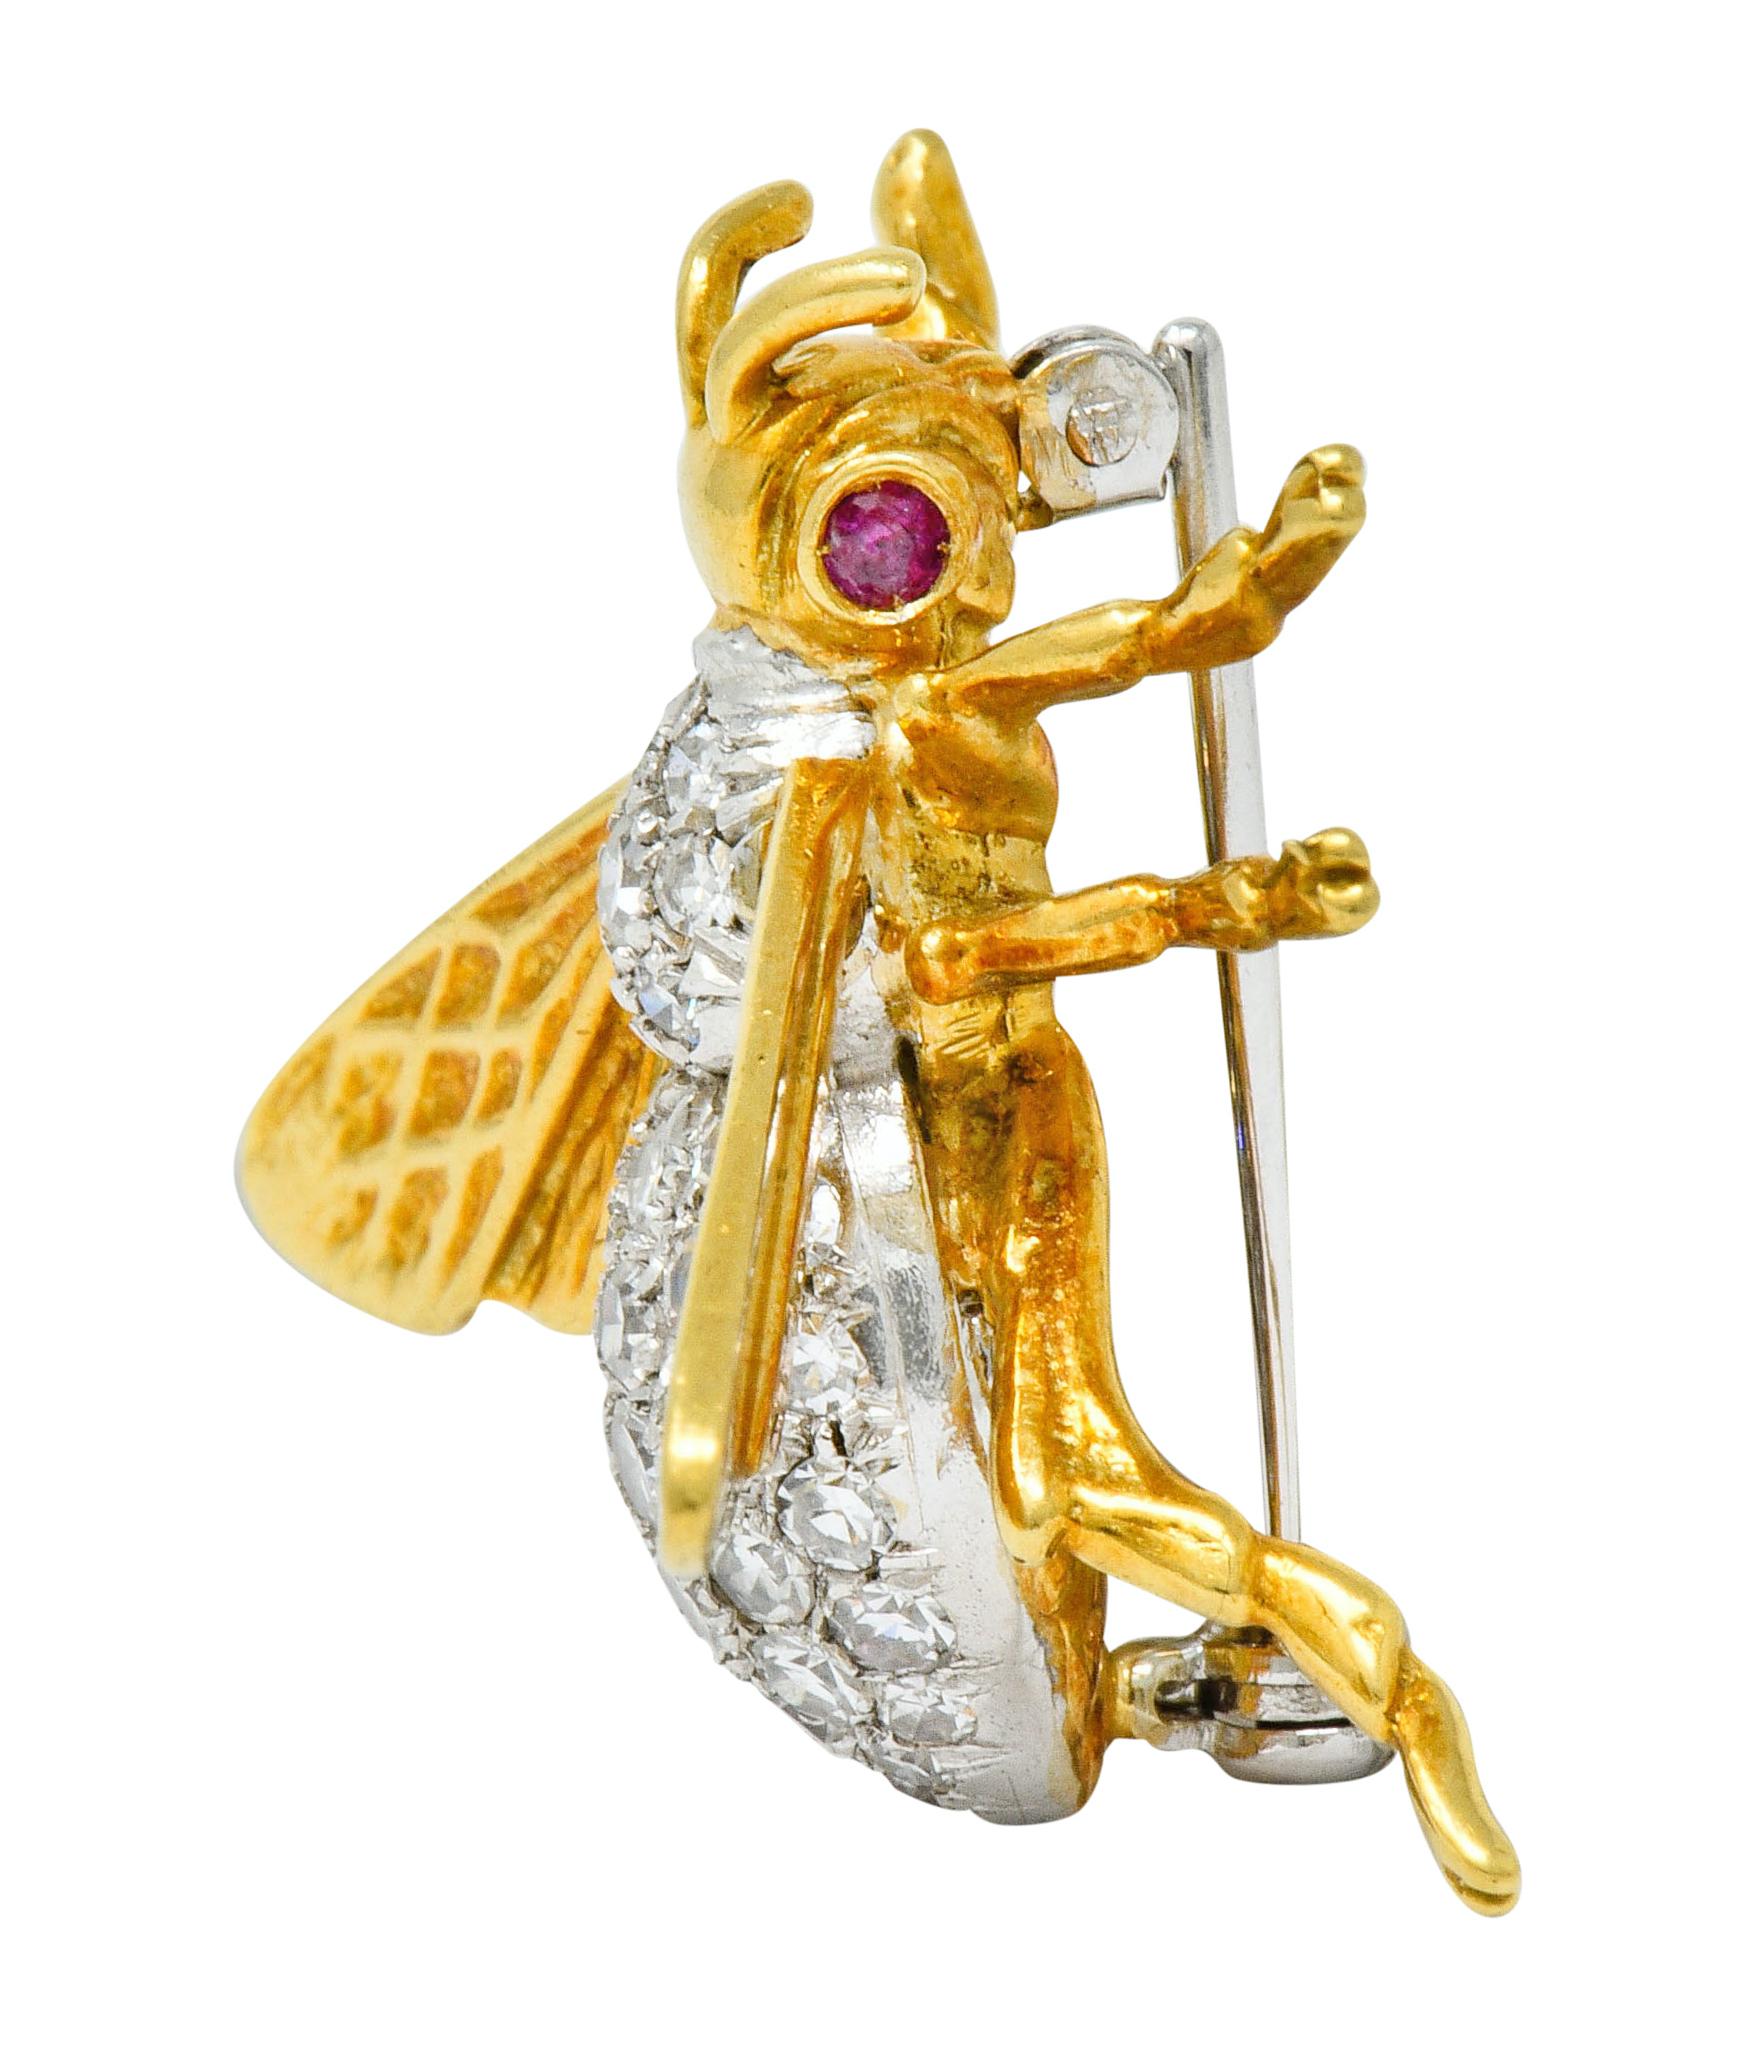 Brooch designed as a buzzing bee with bright gold wings and segmented legs, highly detailed

With gold head and antenna accented by round cut ruby, bezel set as eyes, weighing approximately 0.18 carat total; well-matched light red

Thorax and